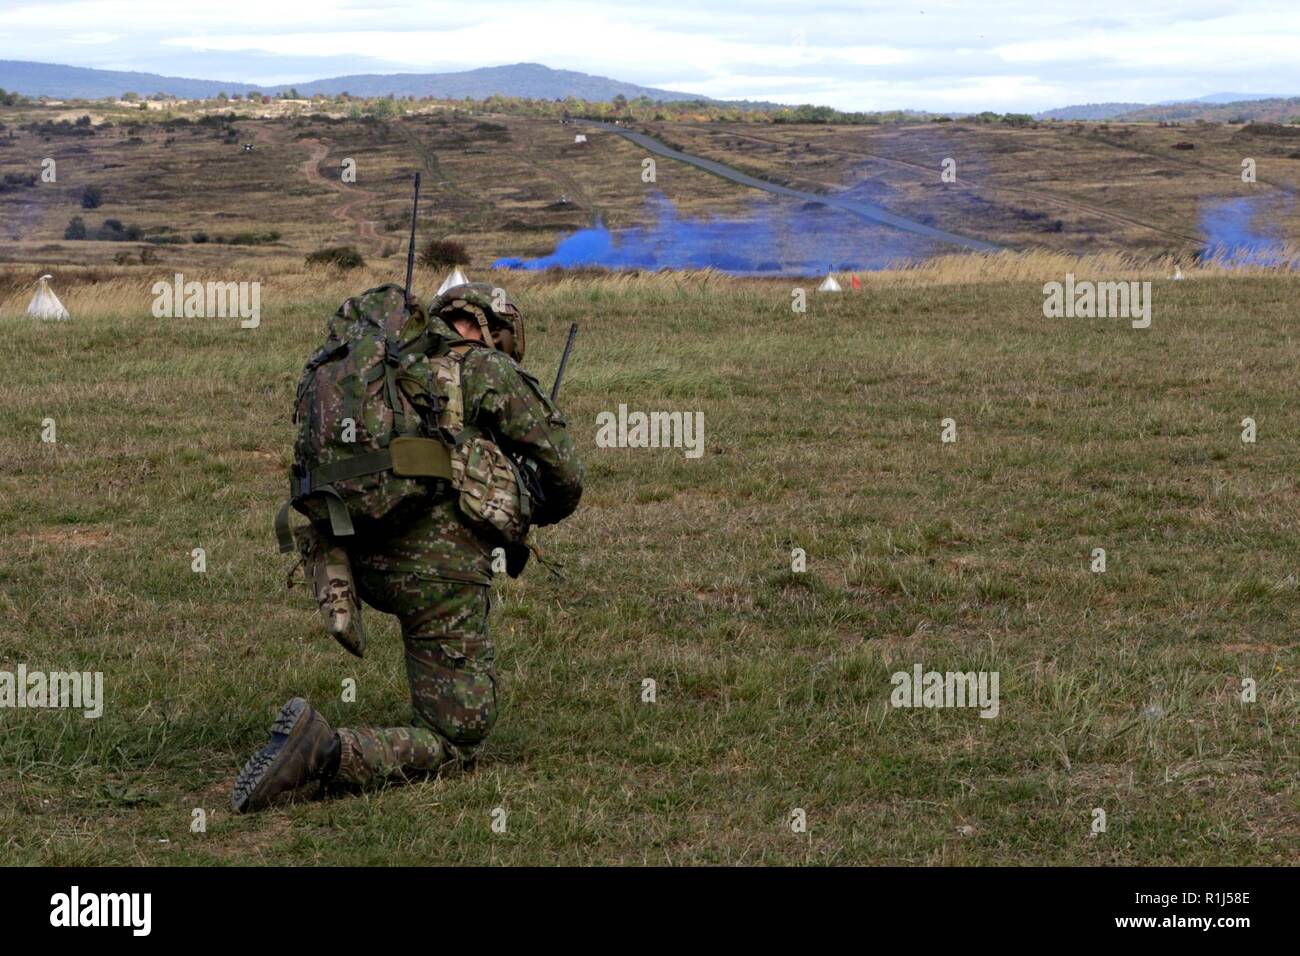 A Slovakian Soldier kneels and communicates with his team through a radio during a live-fire exercise for Operation Slovak Shield 2018 at the Lest Military Training Area in Lest, Slovakia, Sept. 27.    The exercise features U.S. Soldiers from 1st Squadron, 7th Cavalry Regiment, 1st Armored Brigade Combat Team, 1st Cavalry Division from Fort Hood, Texas, integrated with Slovakian Soldiers to demonstrate their combined forces capabilities.     1-7 Cavalry Regiment and the Slovakian Army demonstrated live mortar firing, live-fire from military vehicles, dismounted-Soldier live fire, and simulated Stock Photo